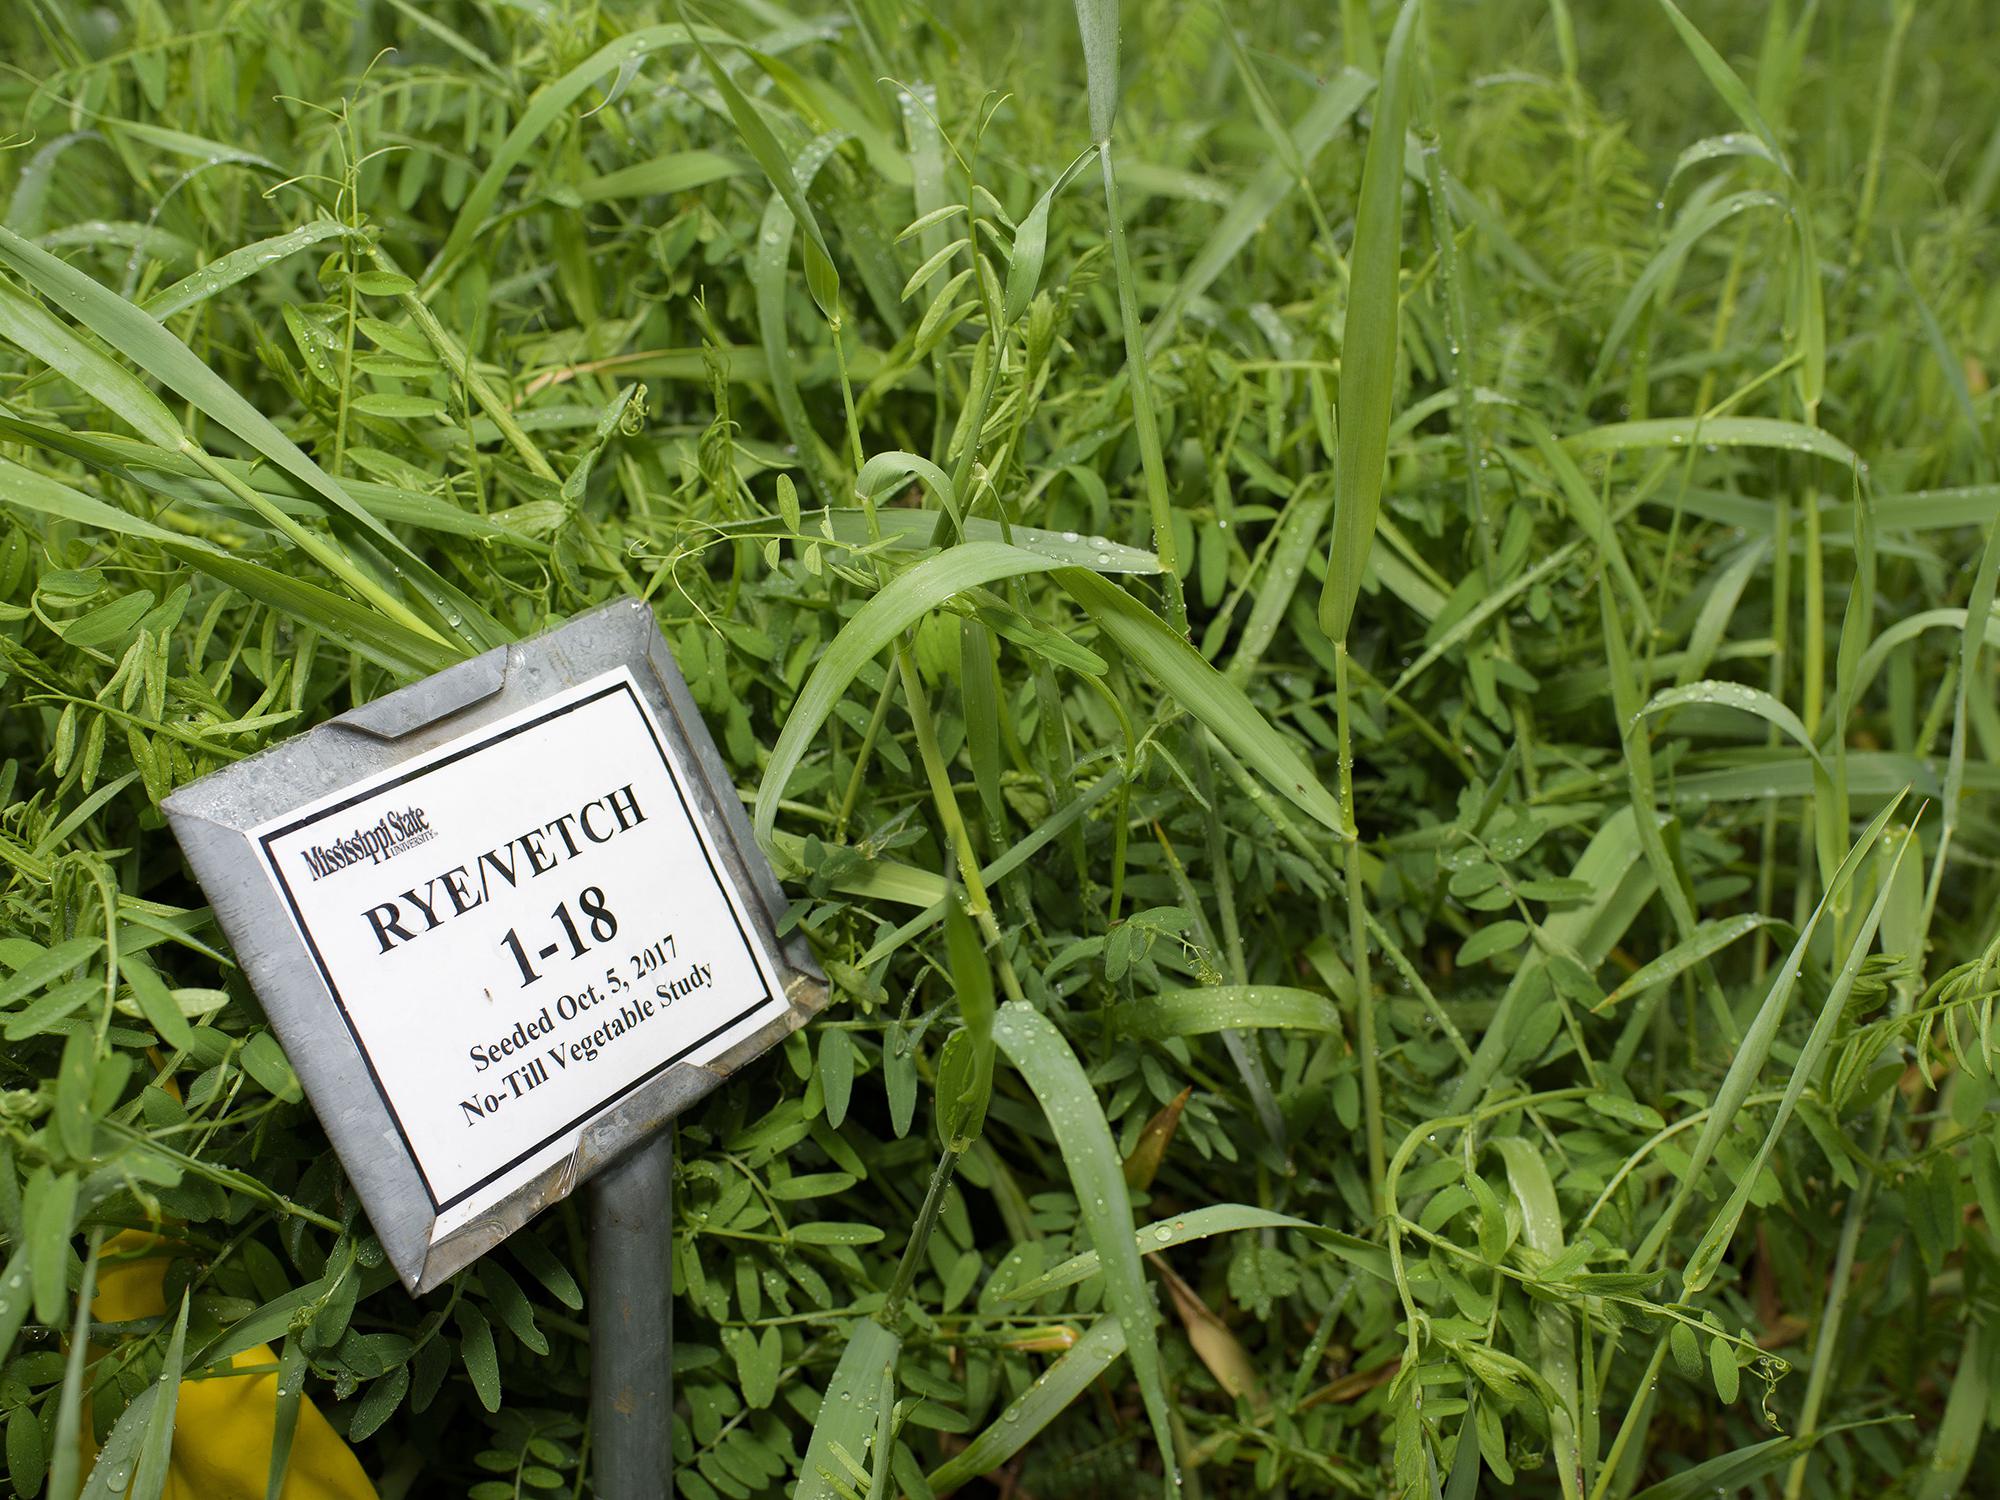 A clump of green rye and vetch grasses with a label resting on a short metal pole in the foreground.